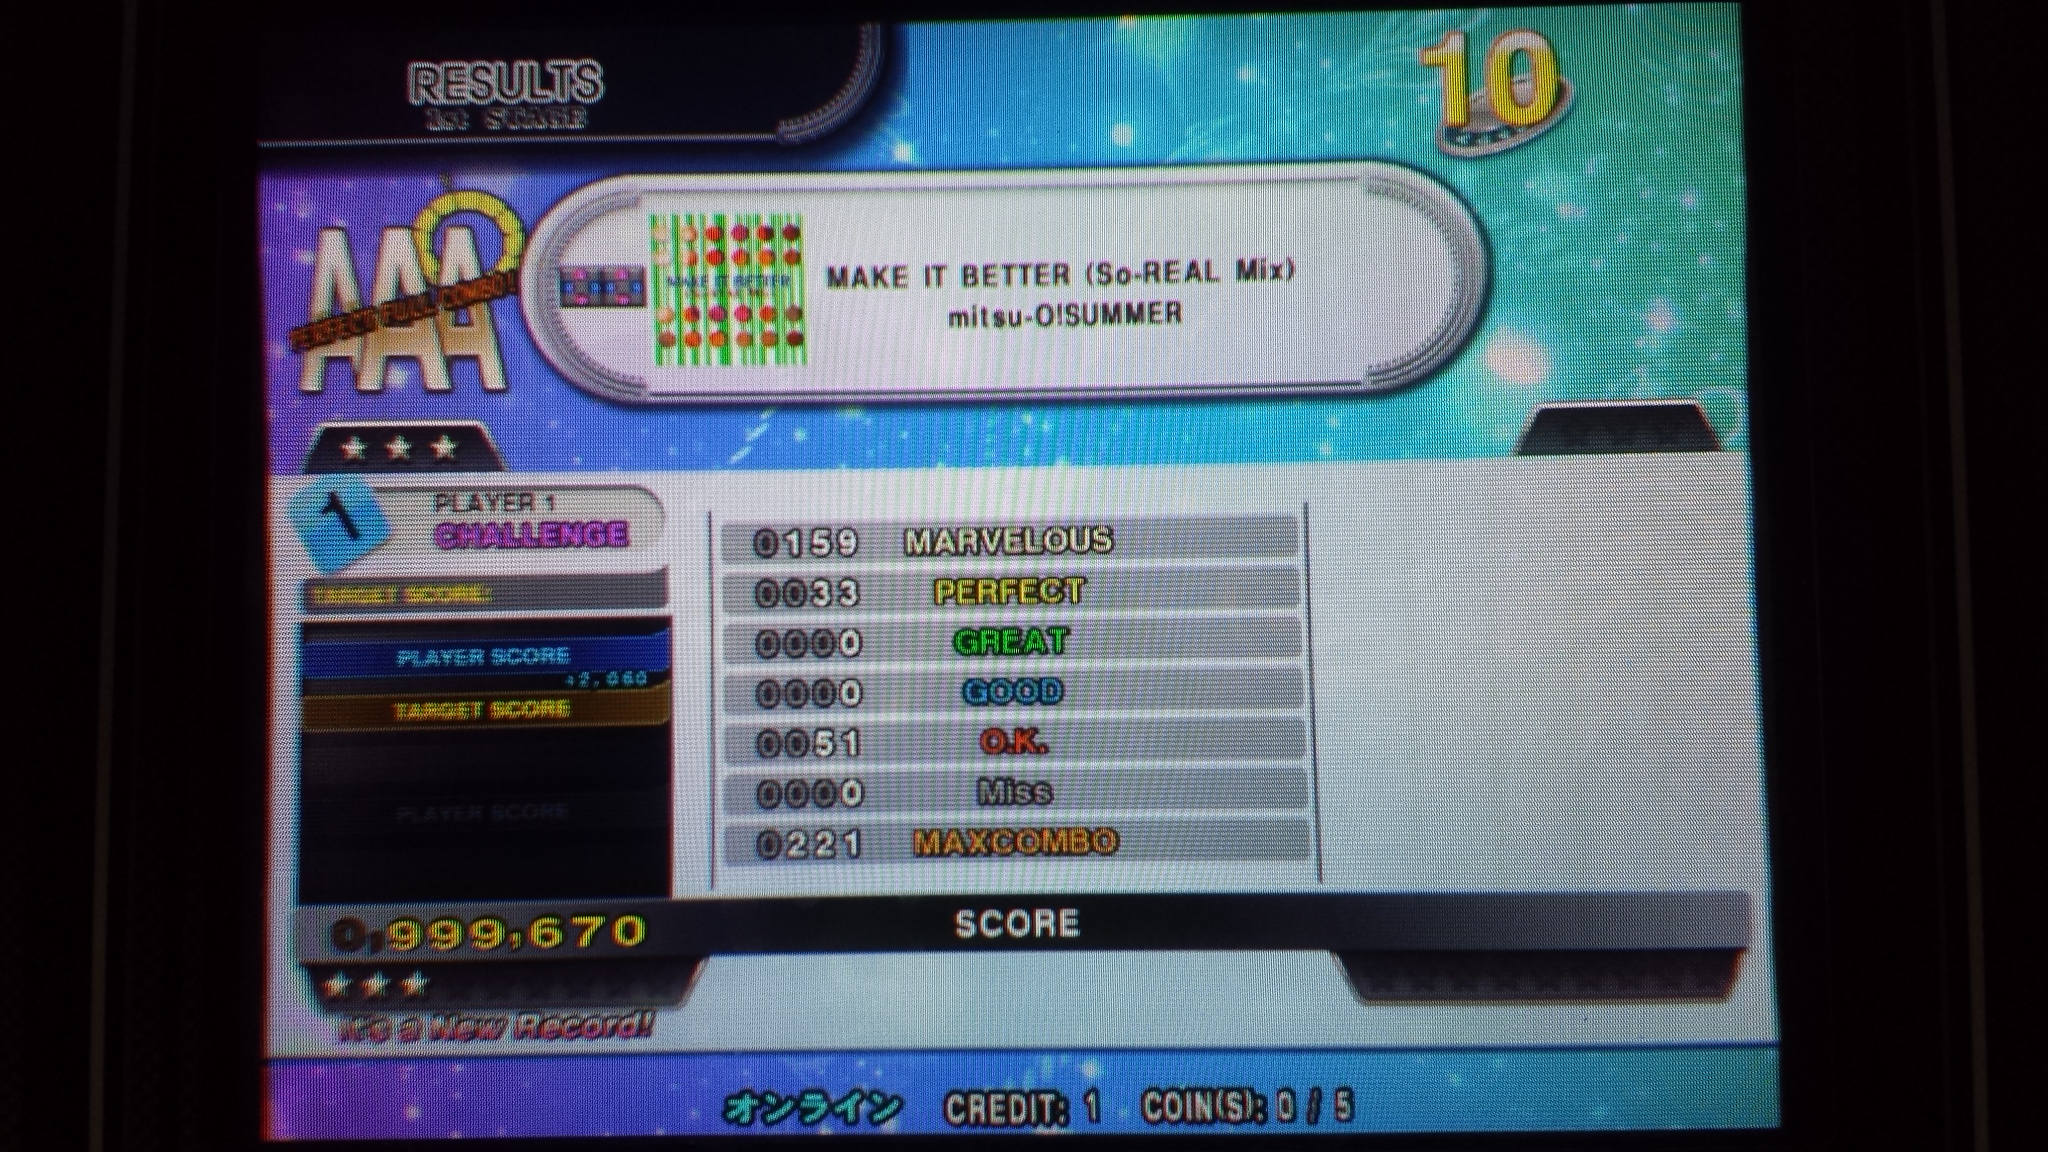 MAKE IT BETTER (So-REAL Mix) CDP DDR 2013 AC